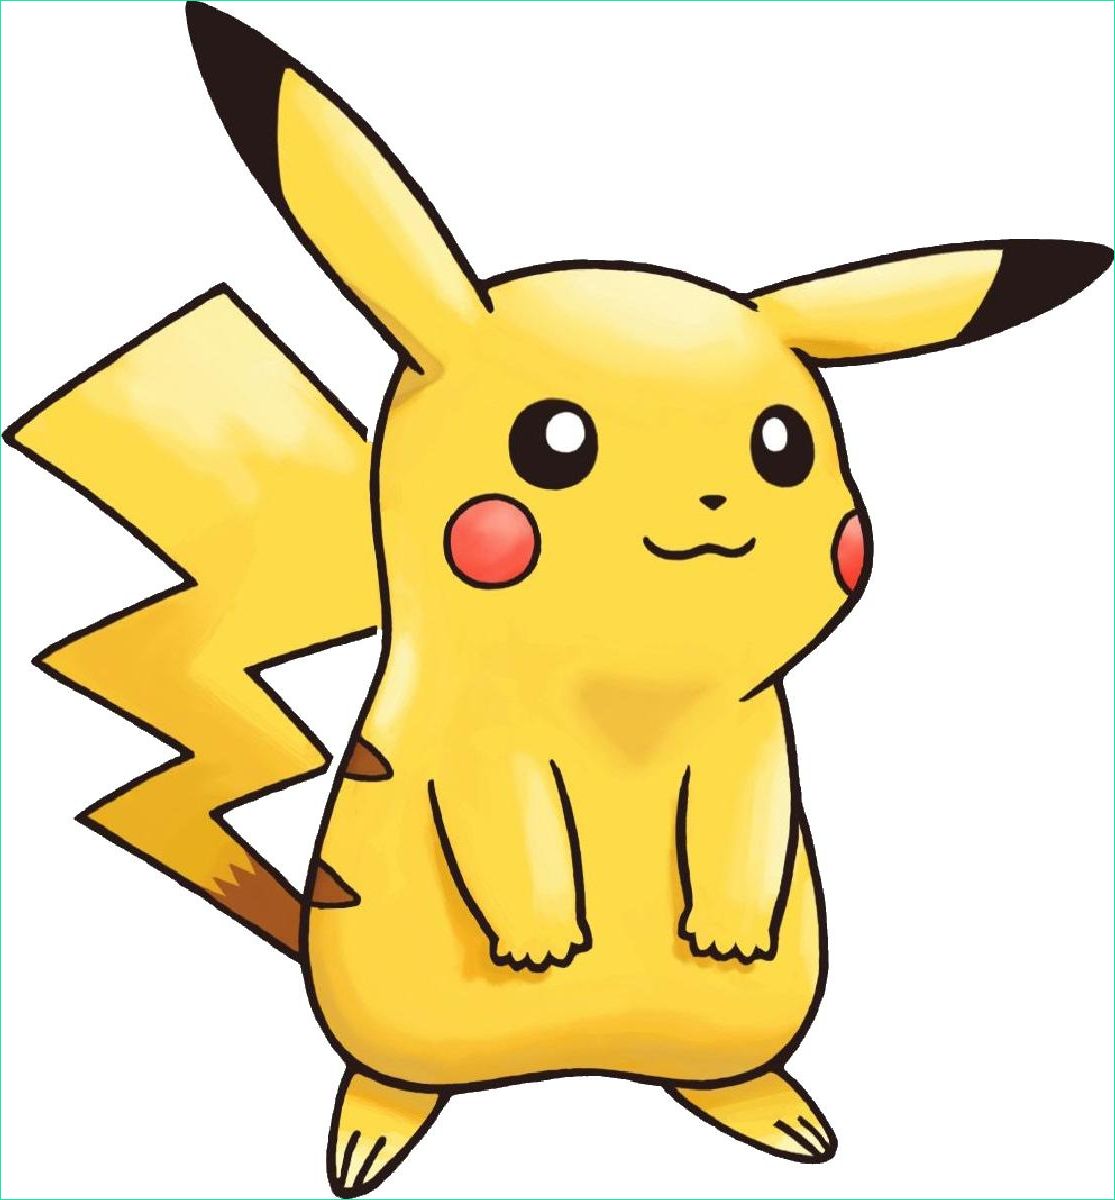 Pikachu Dessin Couleur Luxe Collection Inspiration Pikachu Dessin Pokemon Facile En Couleur